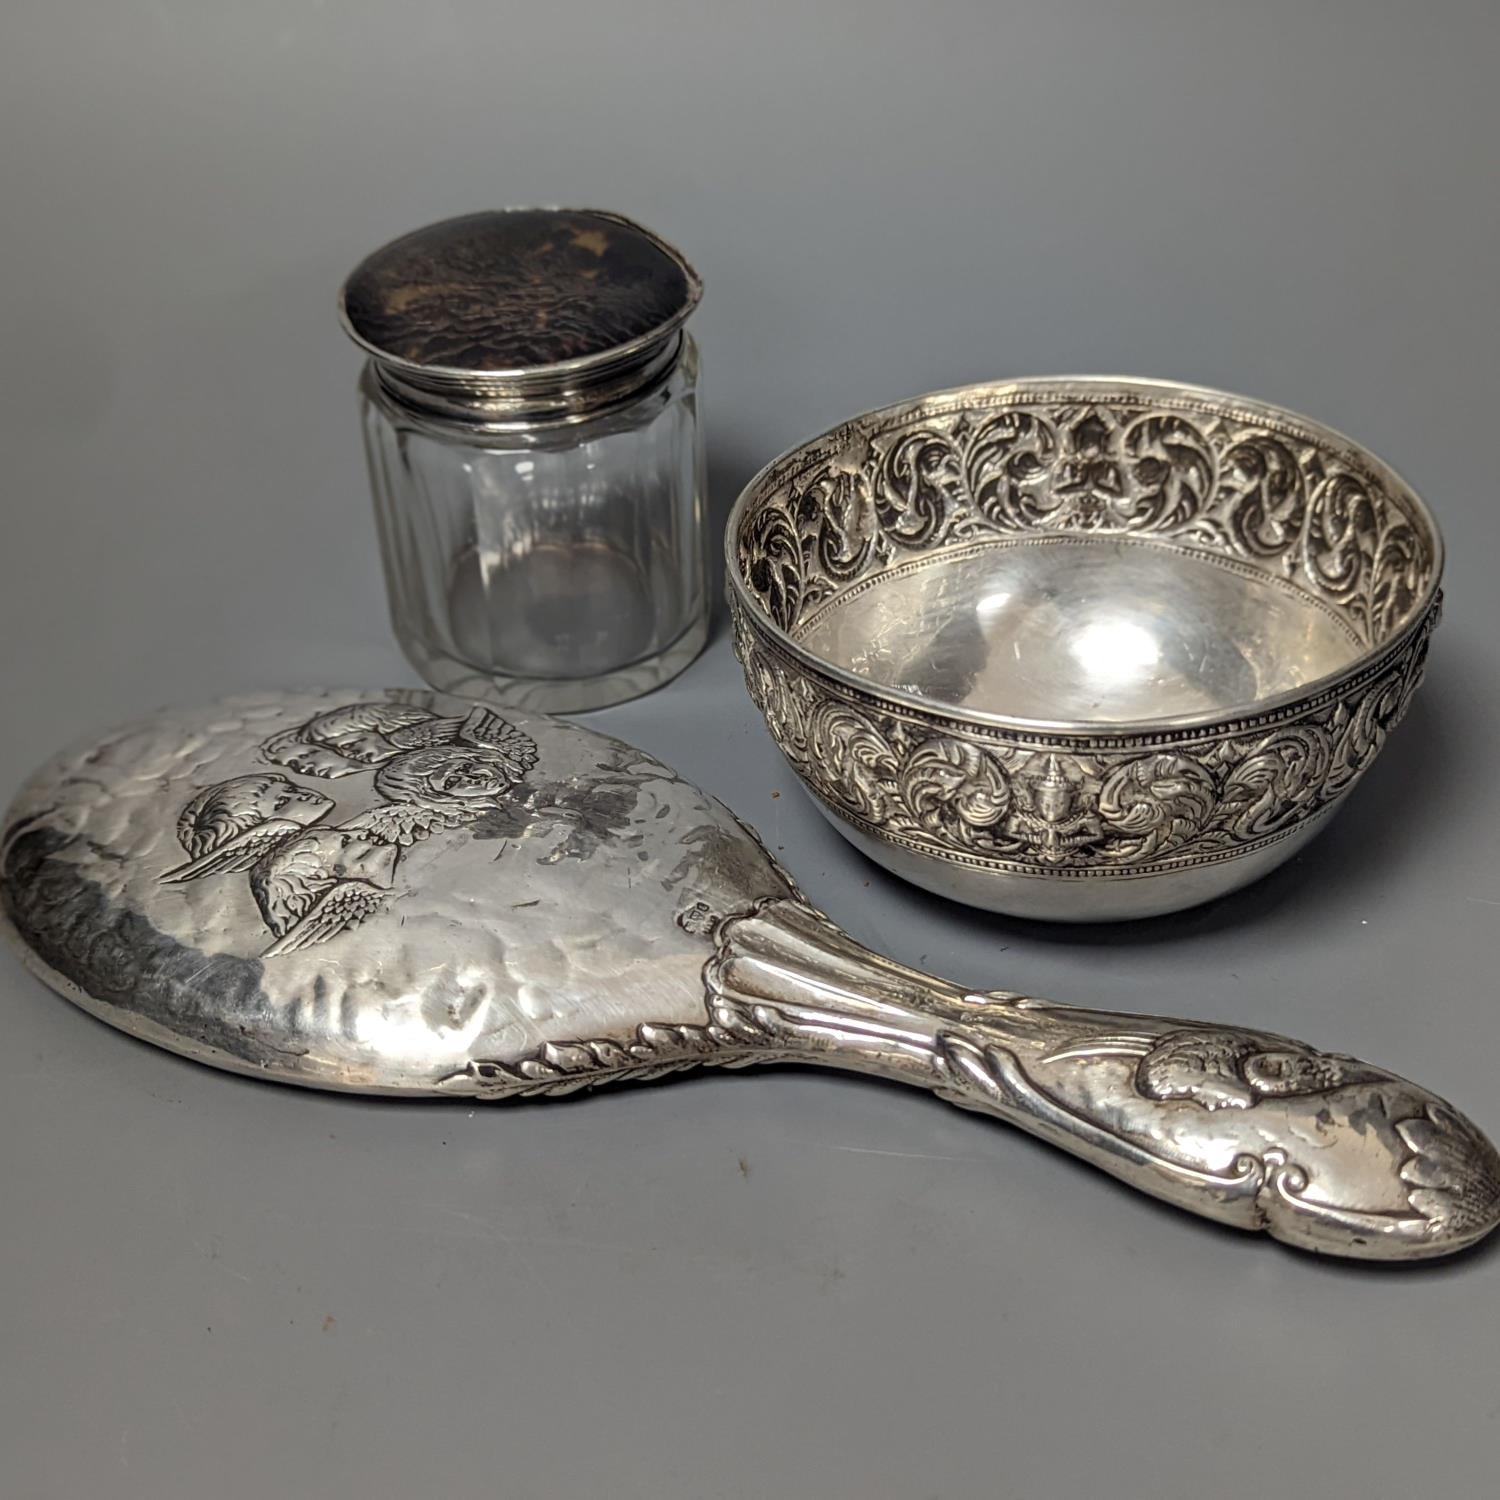 An Edwardian silver mounted 'Reynold's Angels' hand mirror, a silver and tortoiseshell lidded